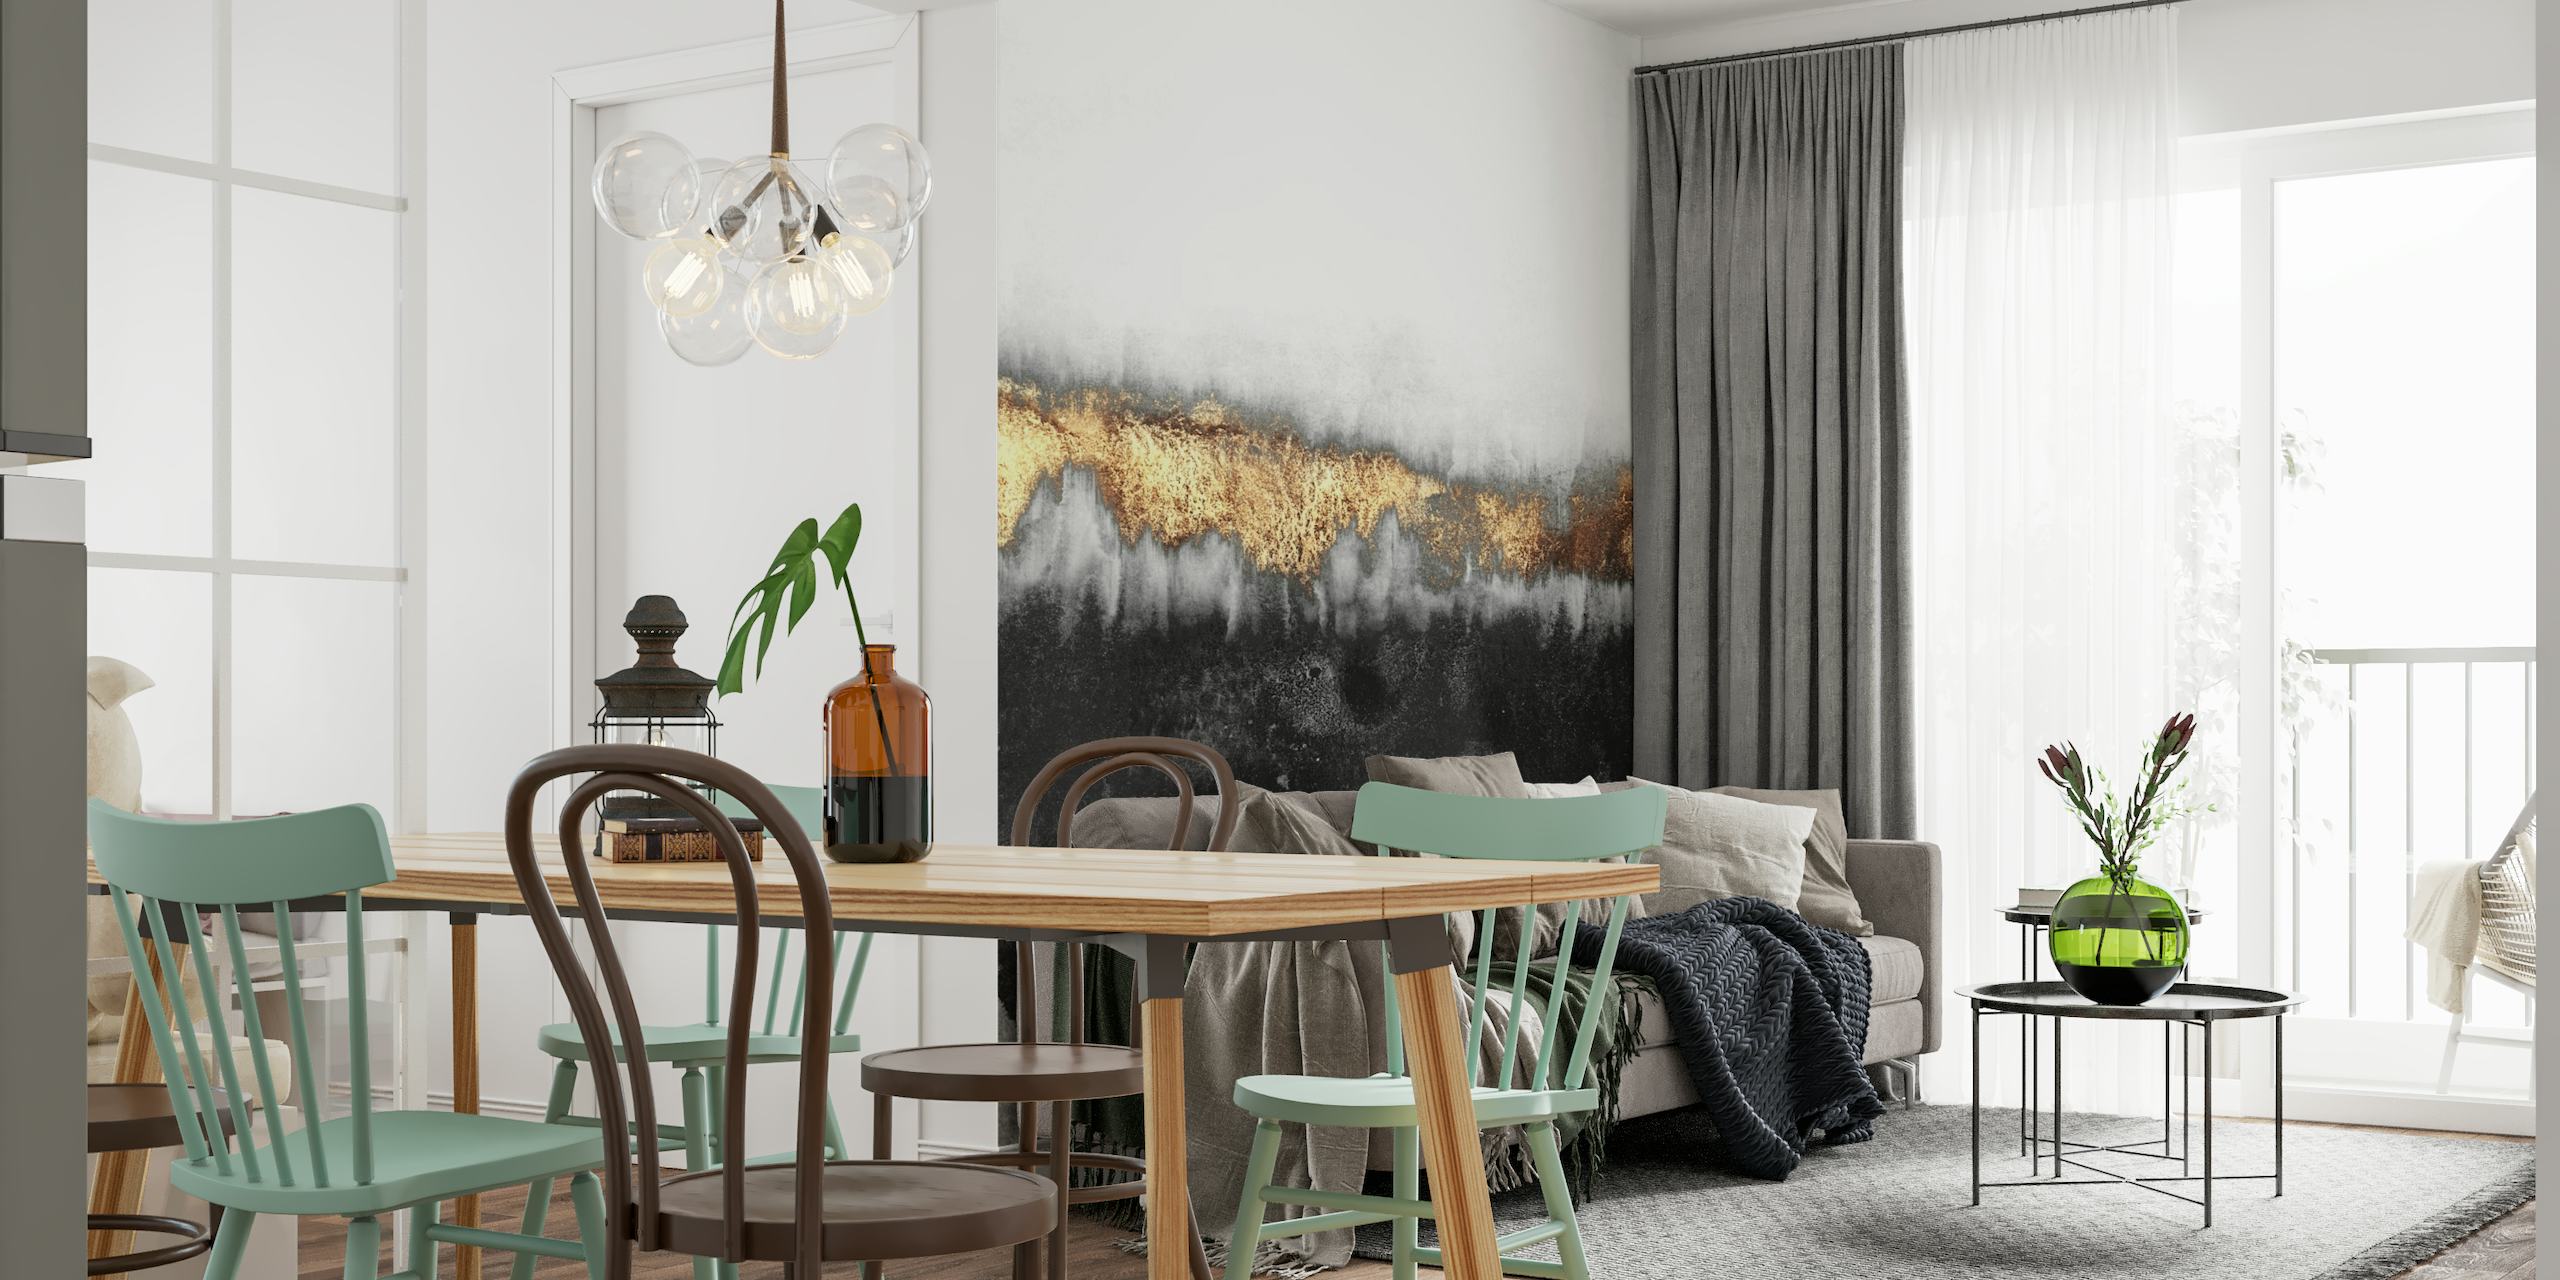 Abstract wall mural with dark shades and a touch of earthy colors